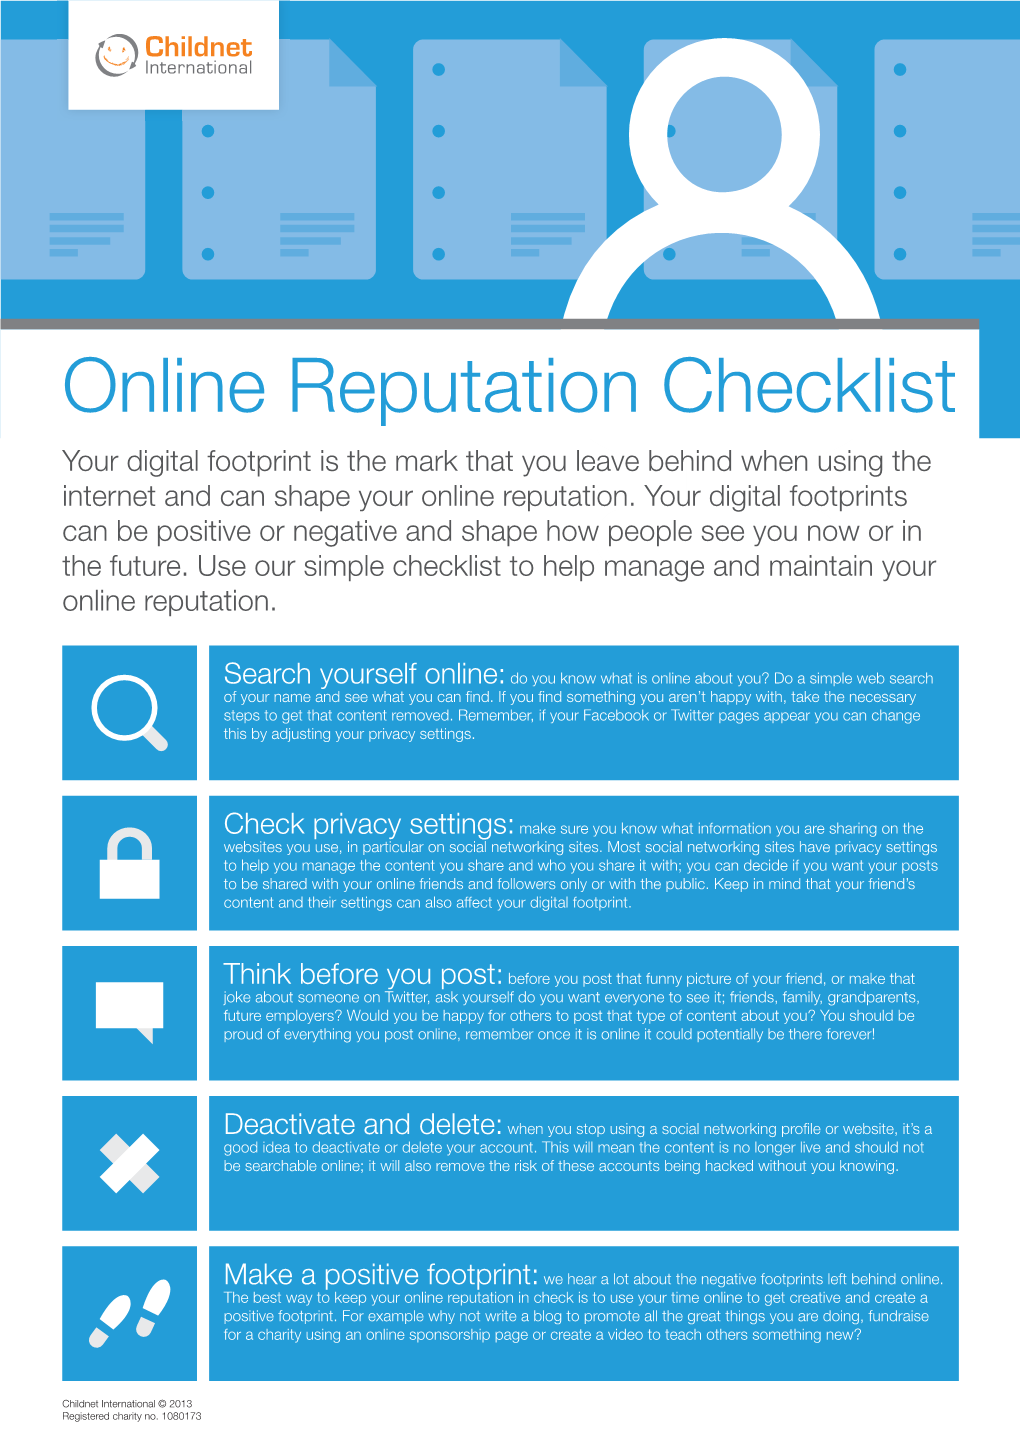 Online Reputation Checklist Your Digital Footprint Is the Mark That You Leave Behind When Using the Internet and Can Shape Your Online Reputation